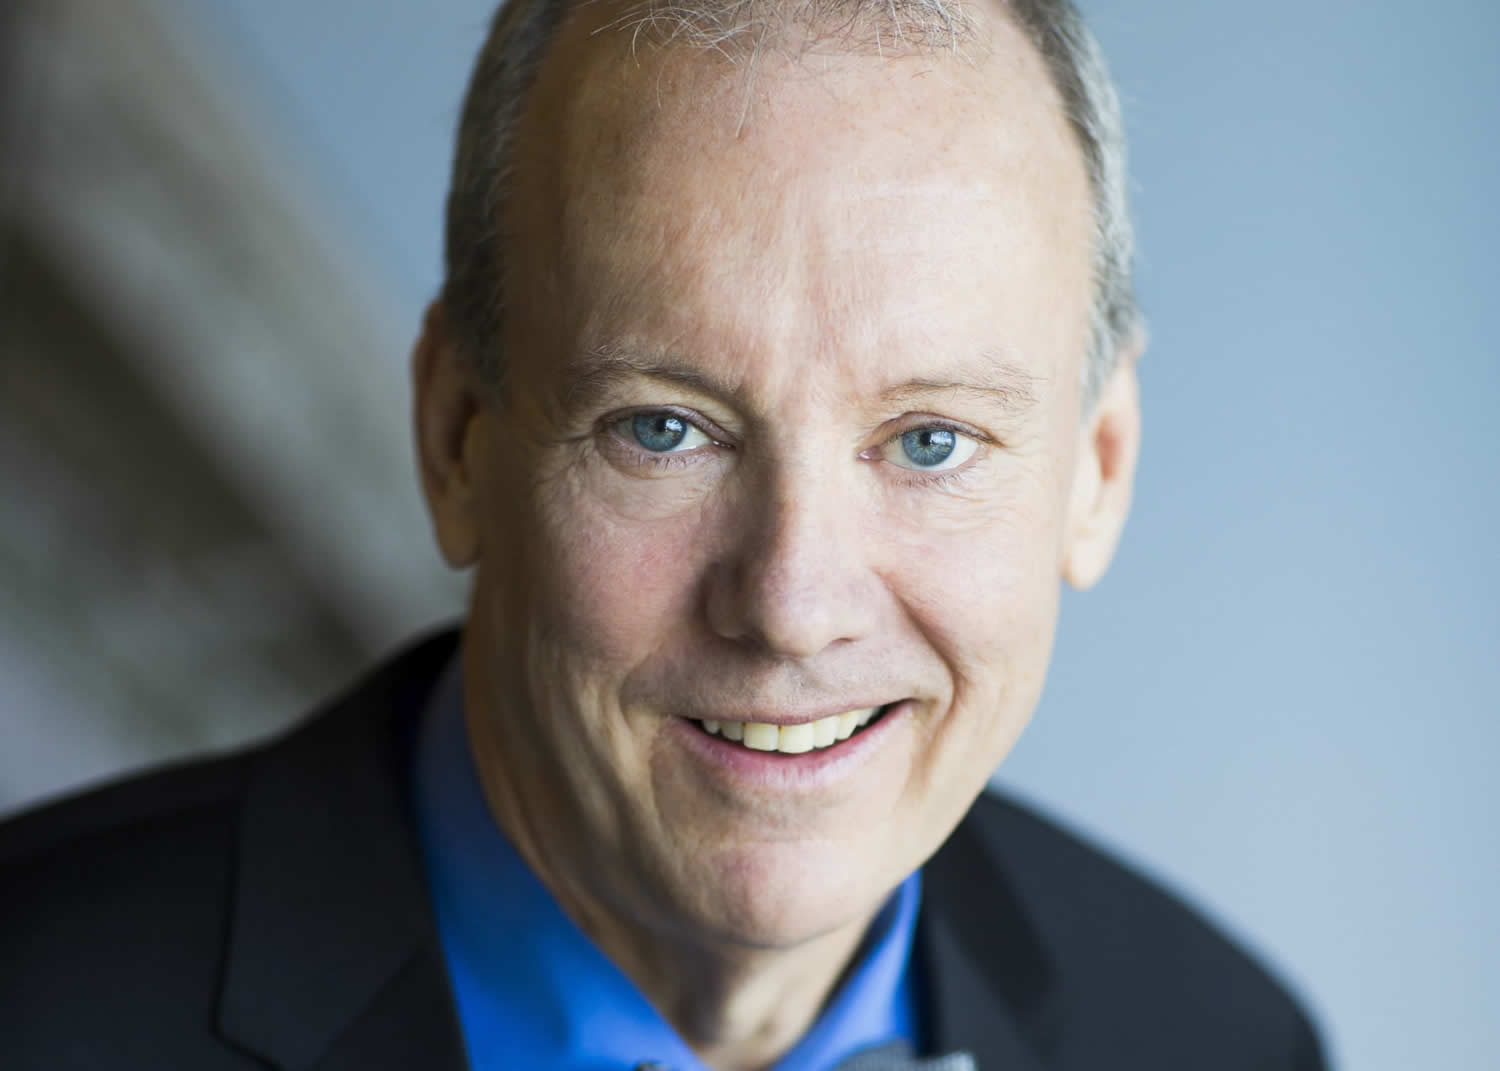 naem-2014-07-16-latest-news-william-mcdonough-to-share-roadmap-for-sustainable-innovation-at-2014-naem-forum-700x500